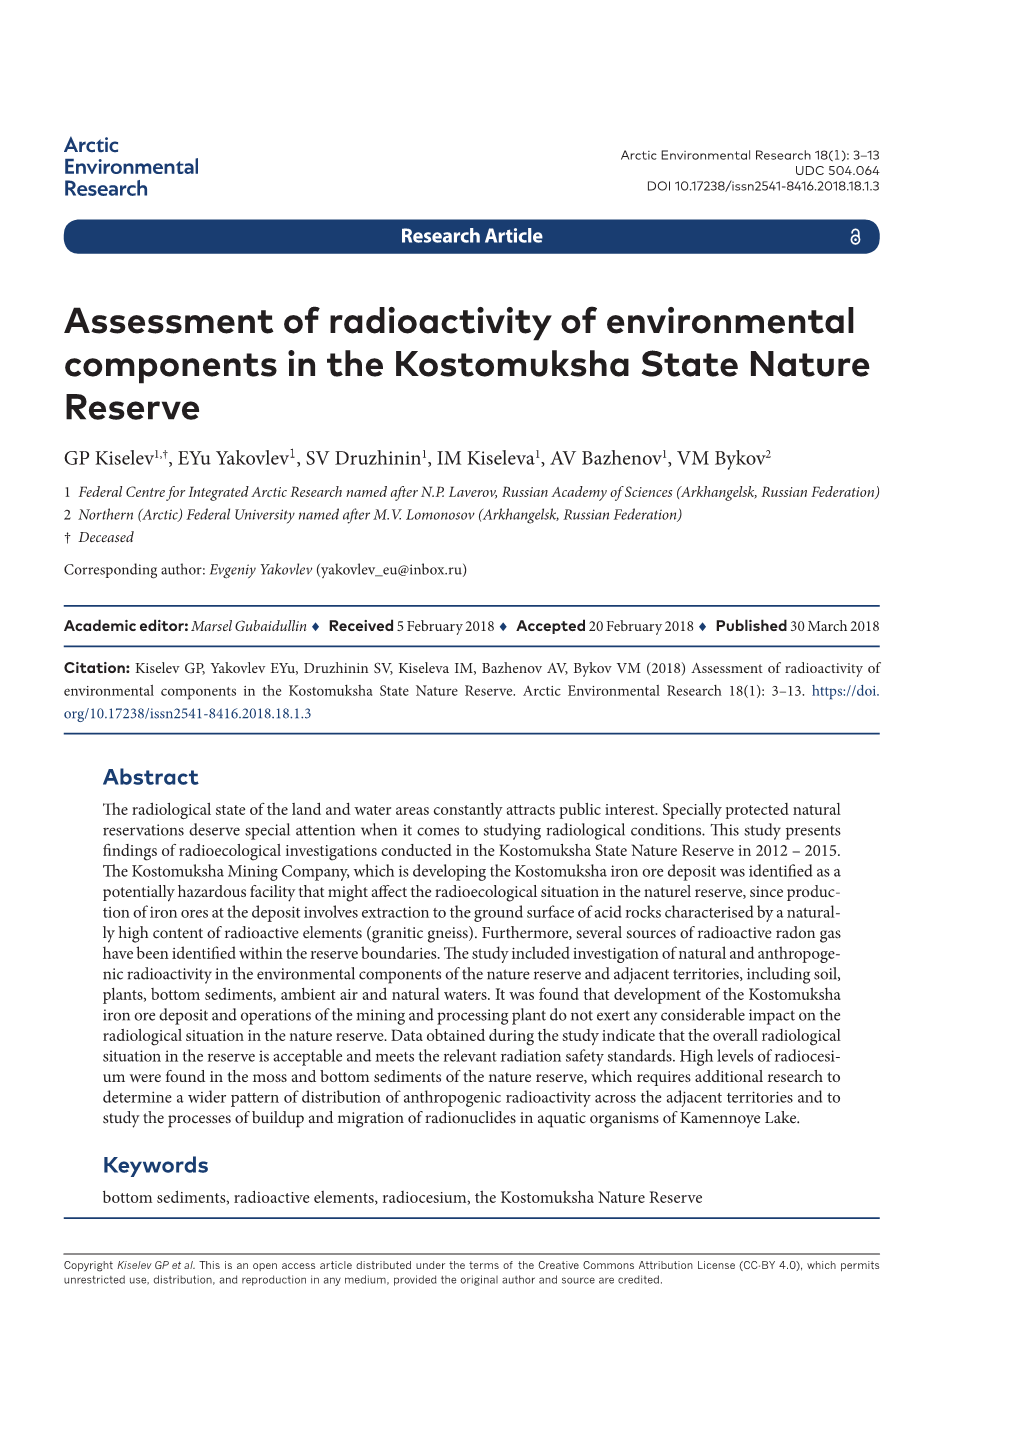 Assessment of Radioactivity of Environmental Components in the Kostomuksha State Nature Reserve